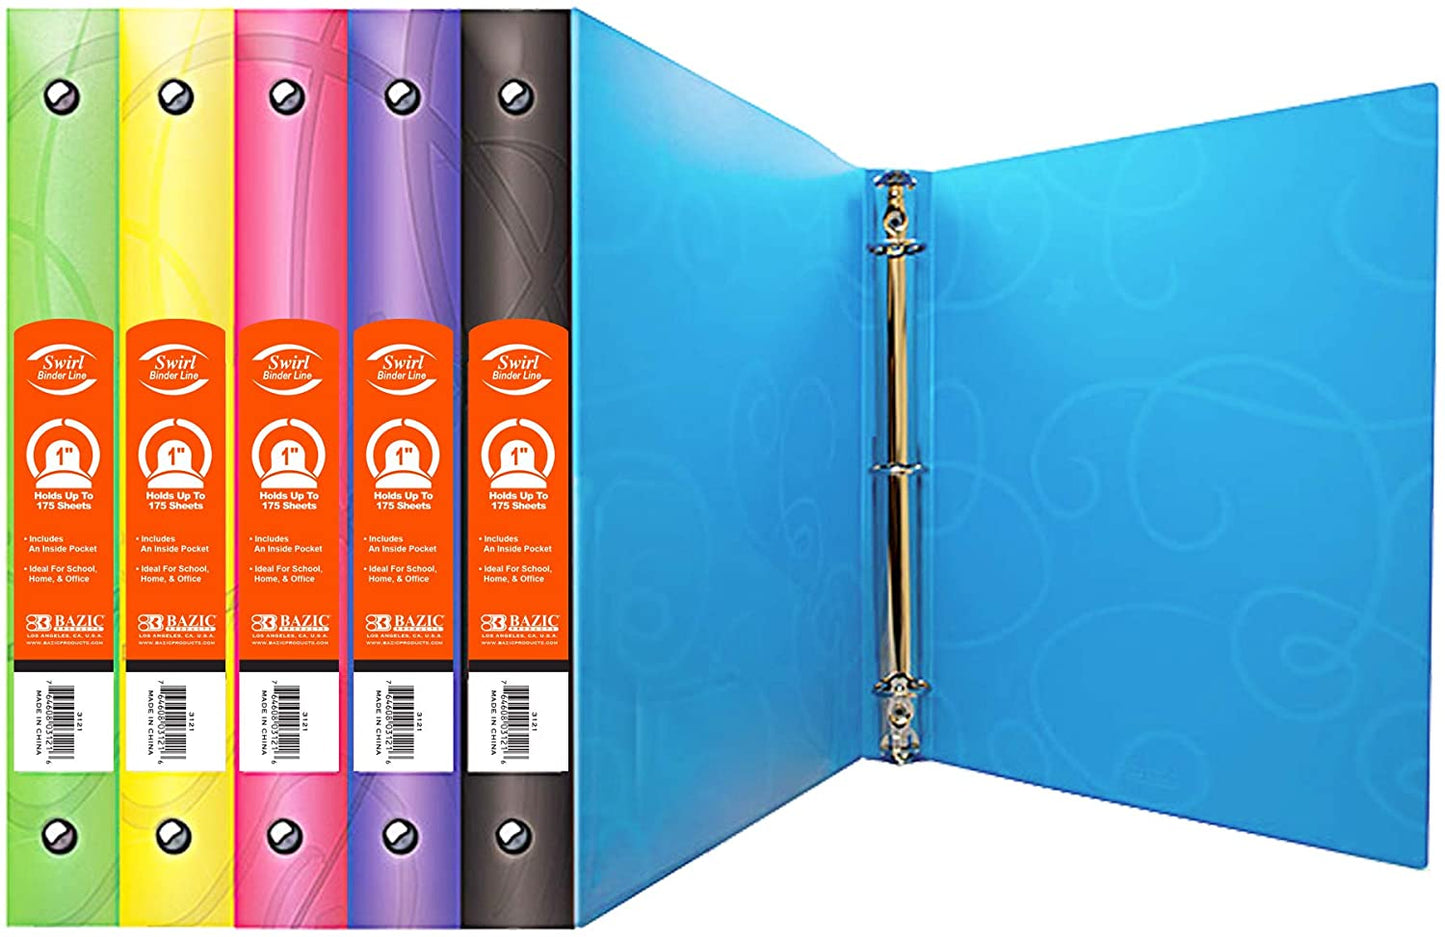 BAZIC 3 Ring Binder 1" Poly Binders Organize Swirl Color Soft Cover Round Ring Hold 175 Sheets Paper 2-Count Random Color